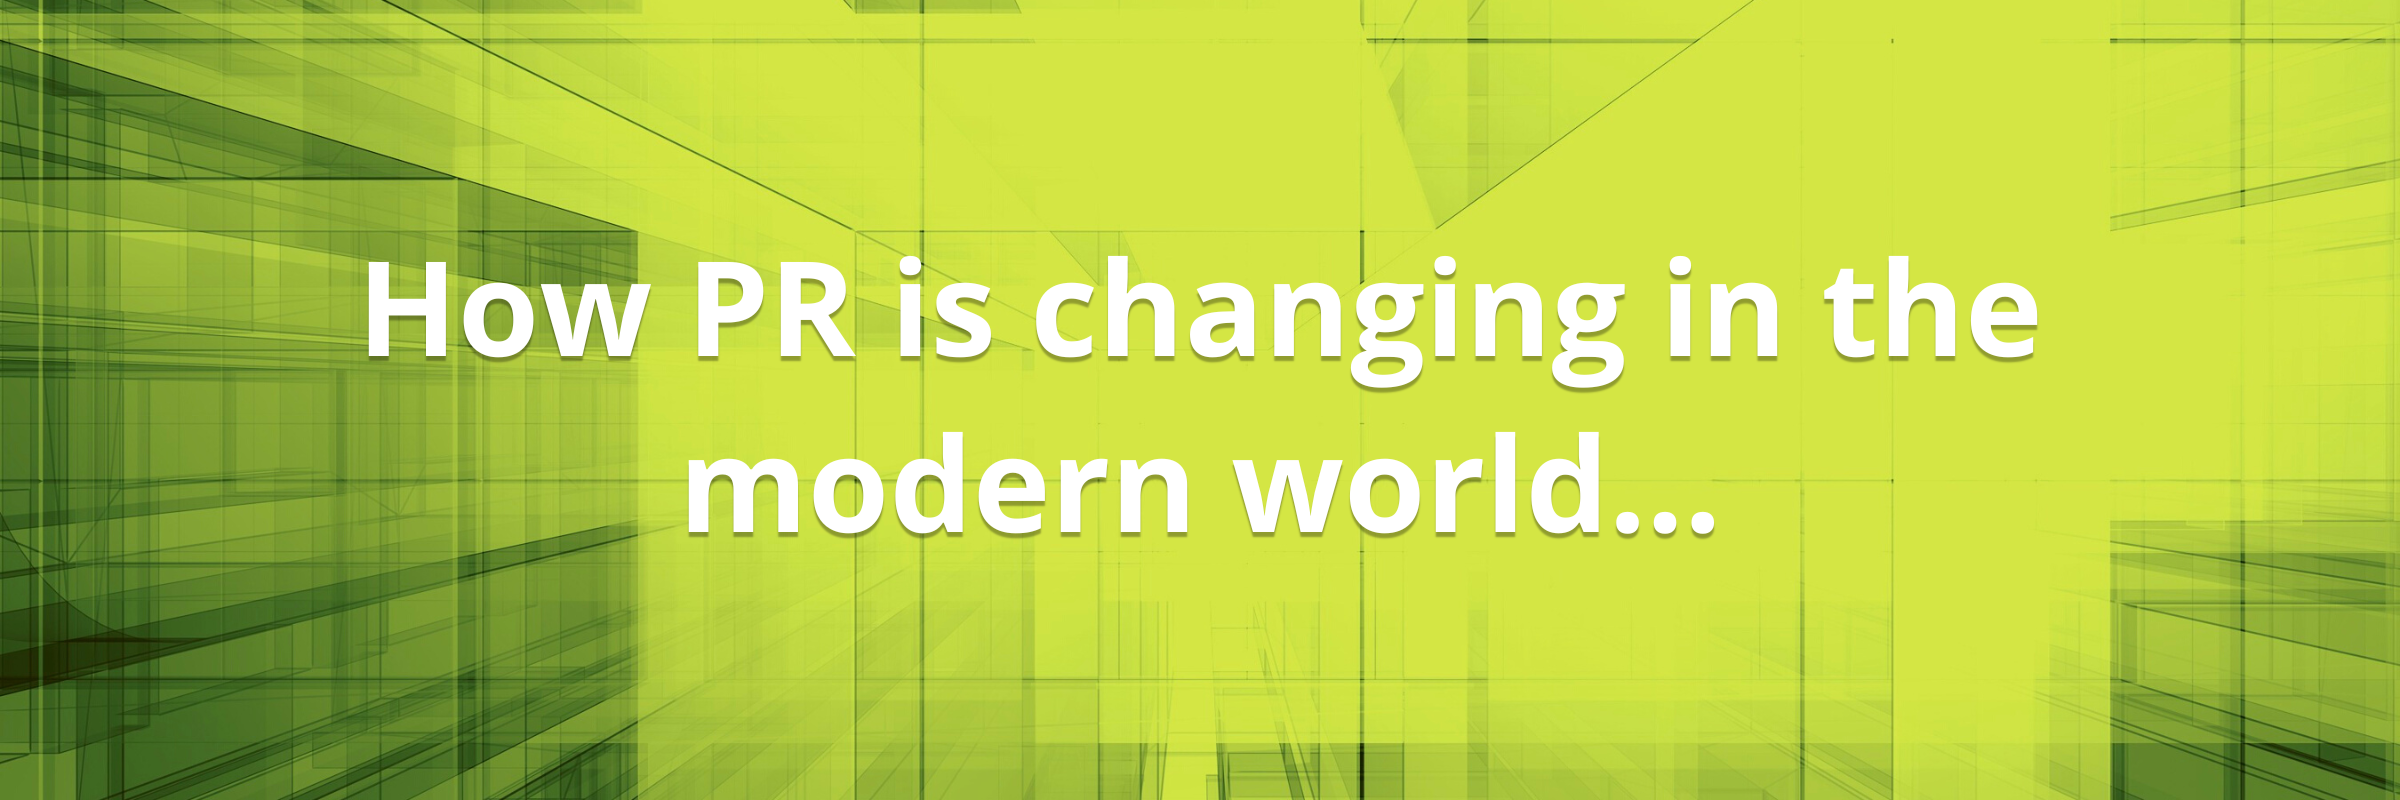 Image with the heading How PR is changing in the modern world